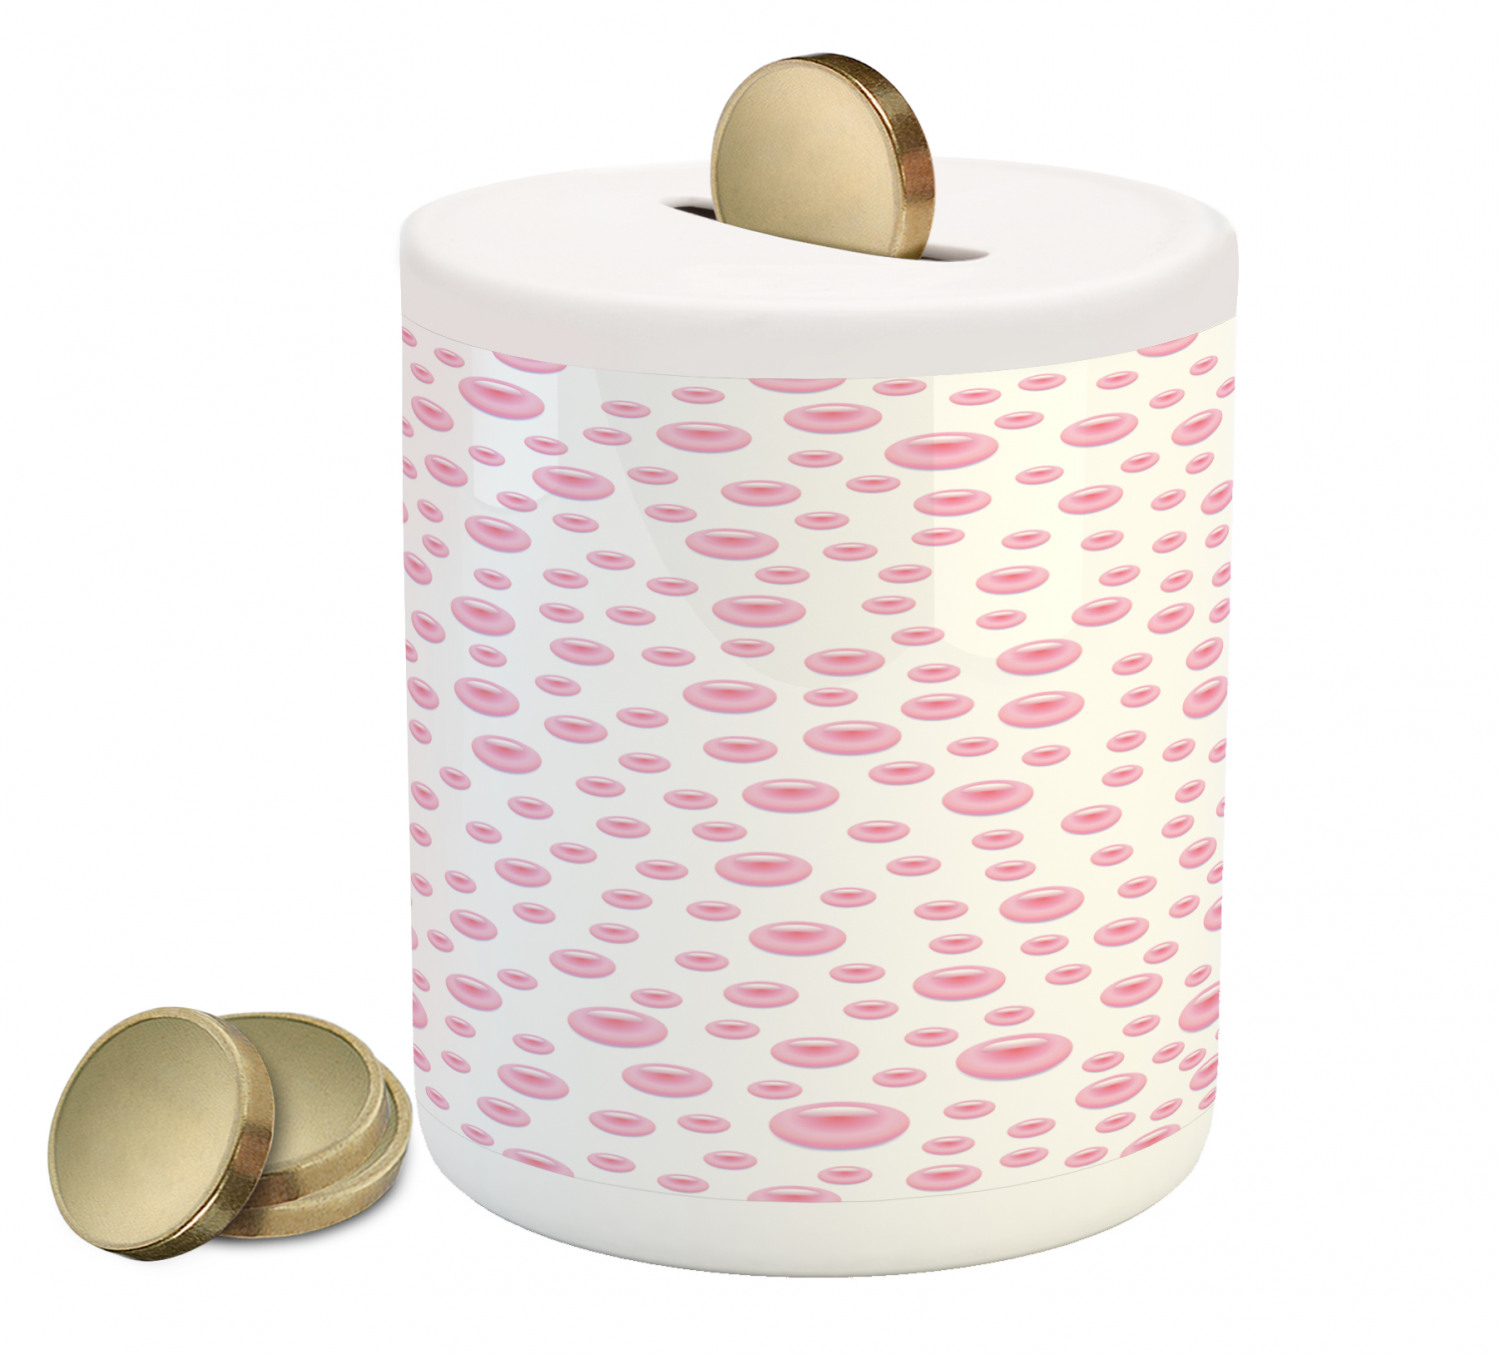 Pearls Piggy Bank, Pattern with Large Small Pink Color Pearls Precious Stones Bridal Print, Ceramic Coin Bank Money Box for Cash Saving, 3.6" X 3.2", White Pink, by Ambesonne - image 1 of 4